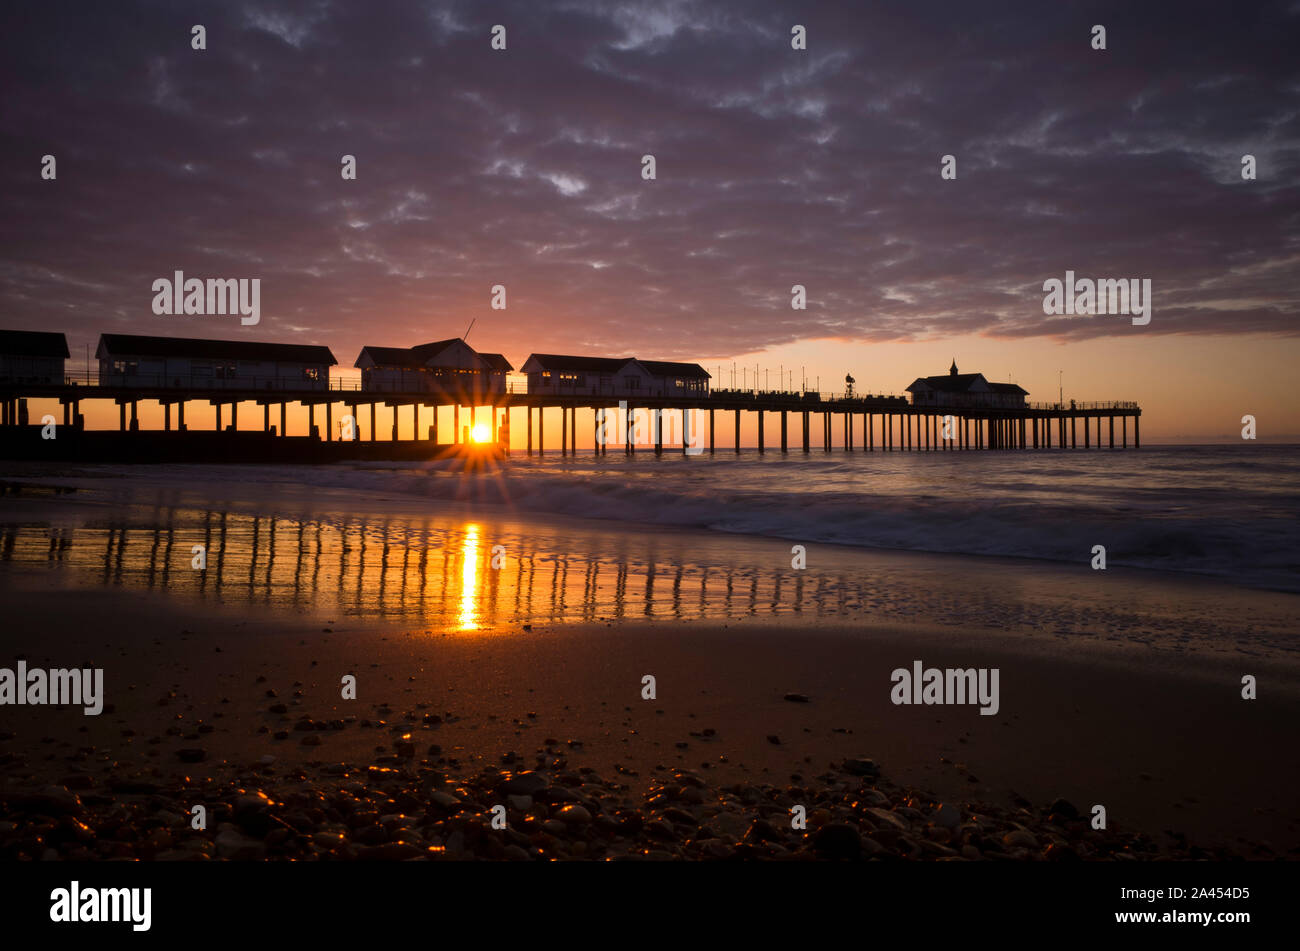 Southwold pier at sunrise, taken from the deserted beach from a low viewpoint with pebbles in the foreground. Stock Photo